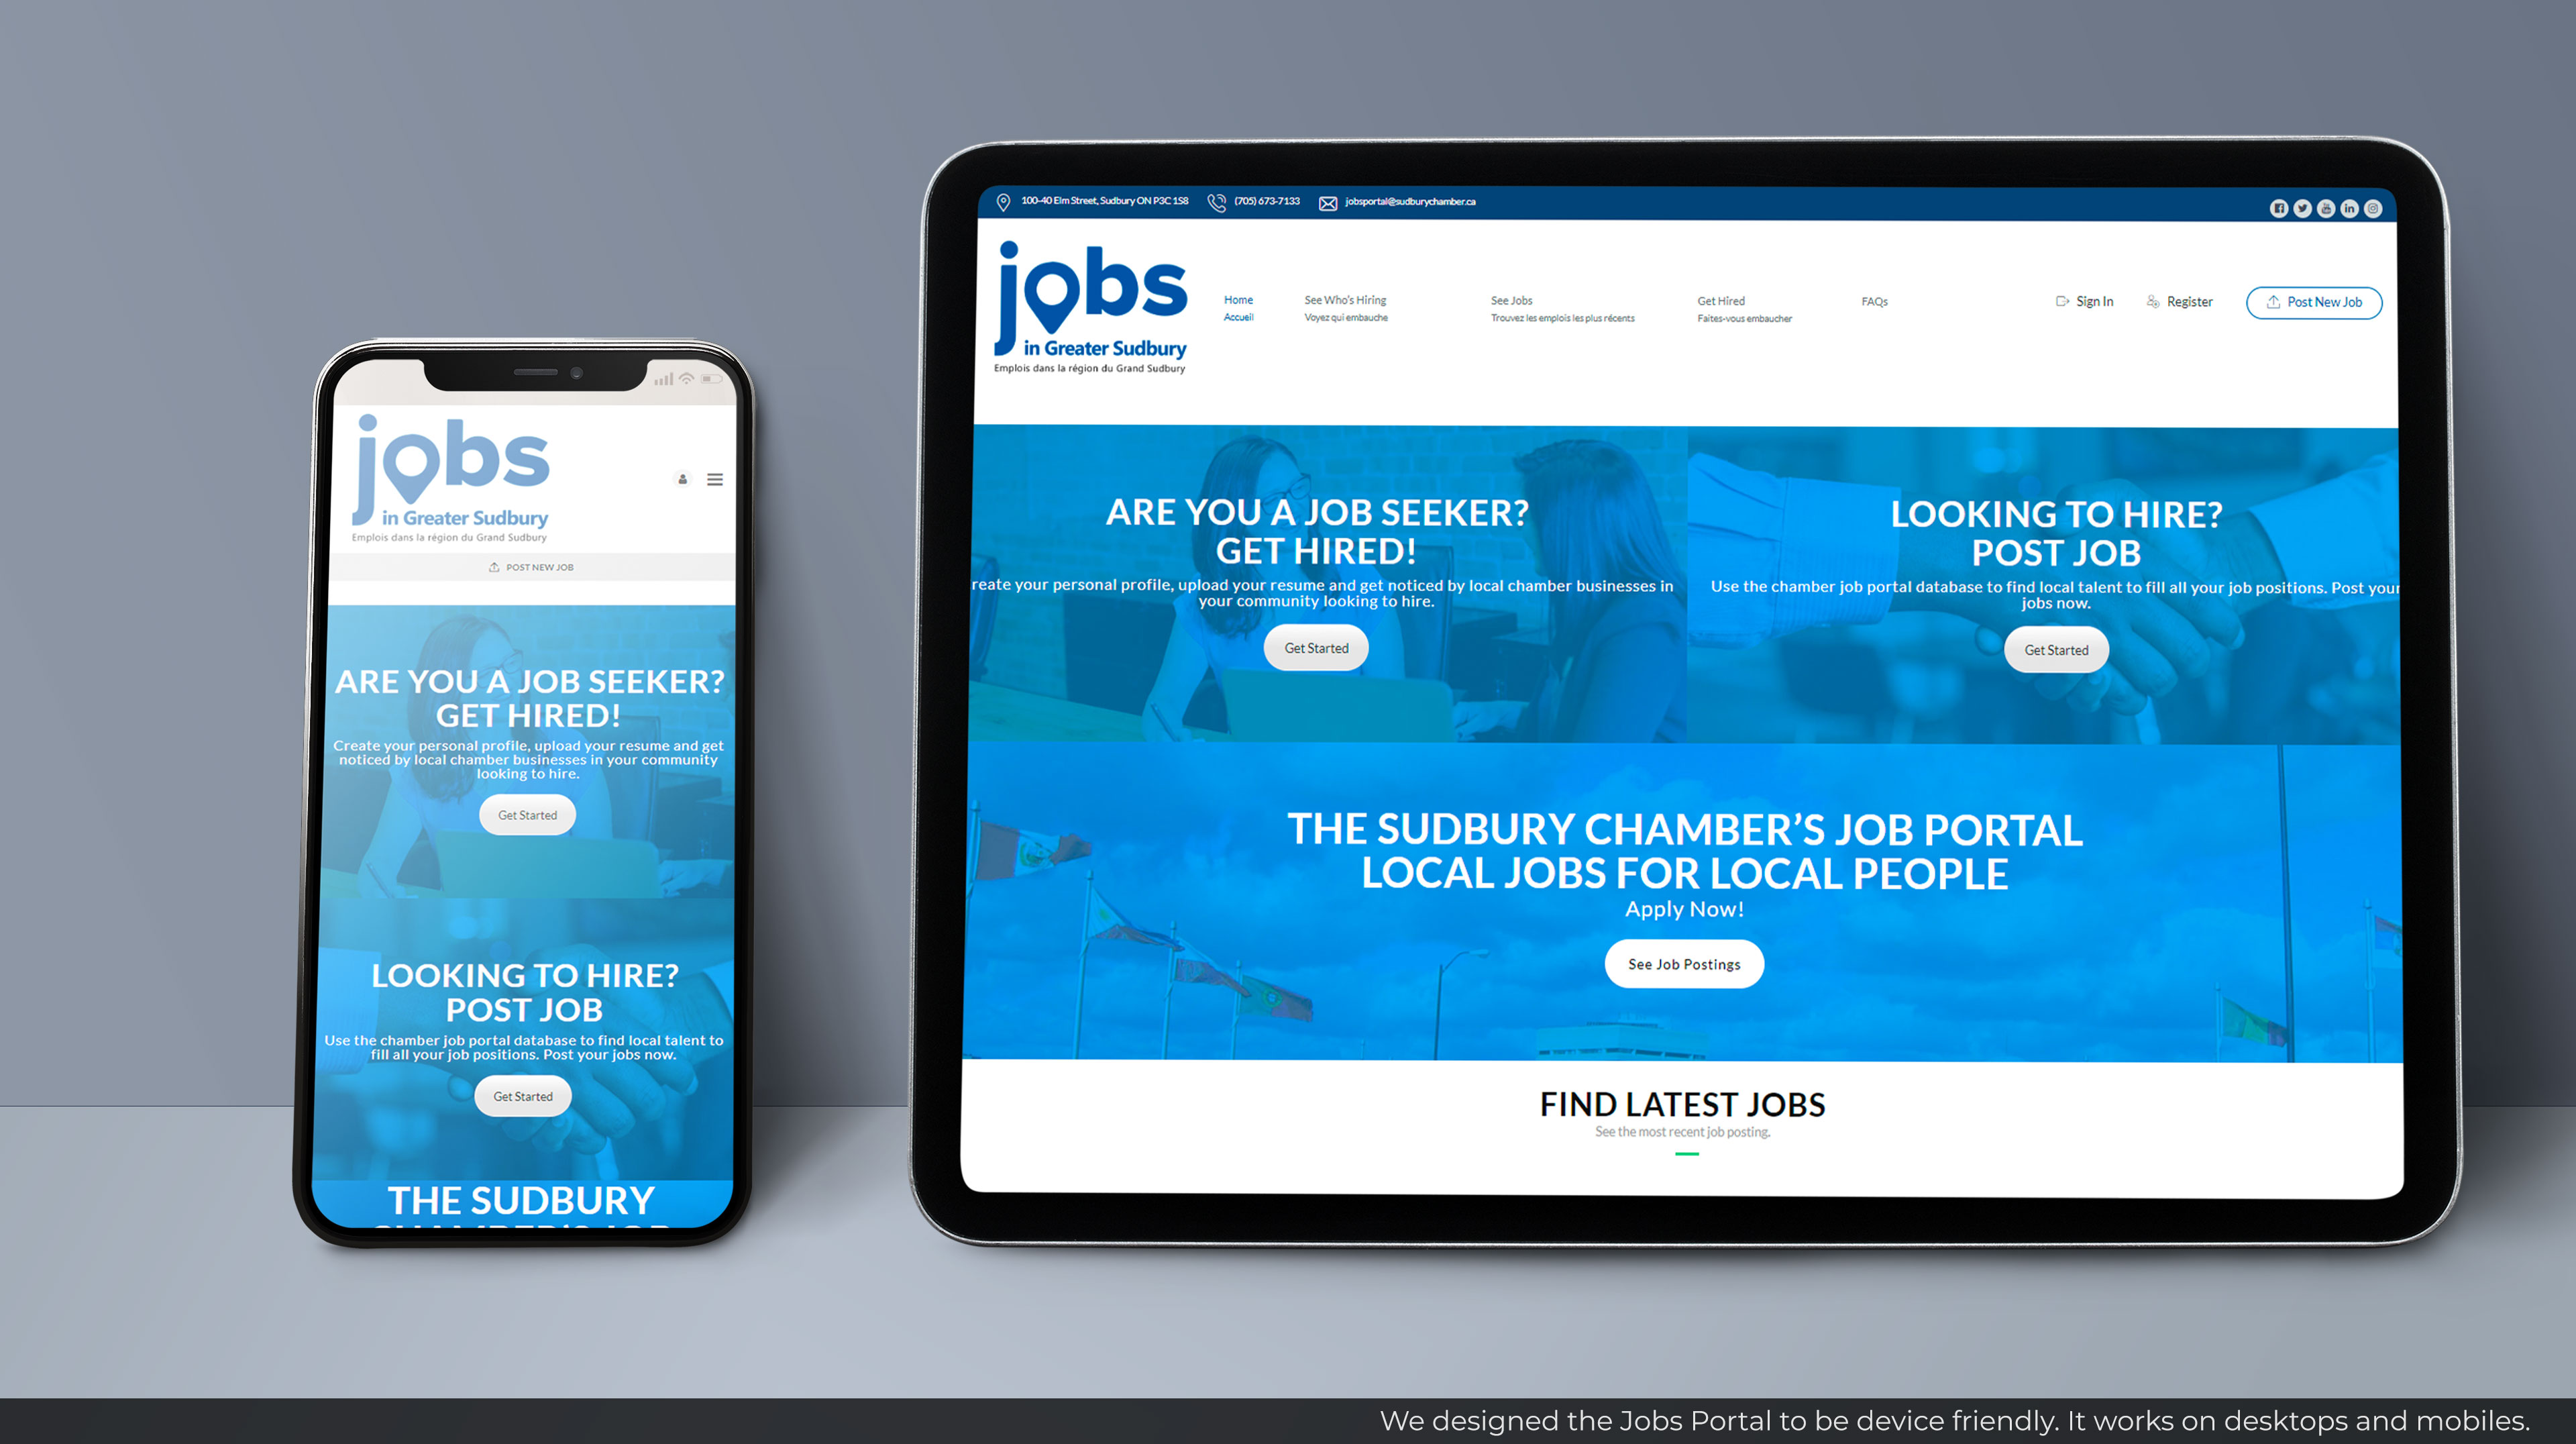 Jobs Portal by the Greater Sudbury Chamber of Commerce.